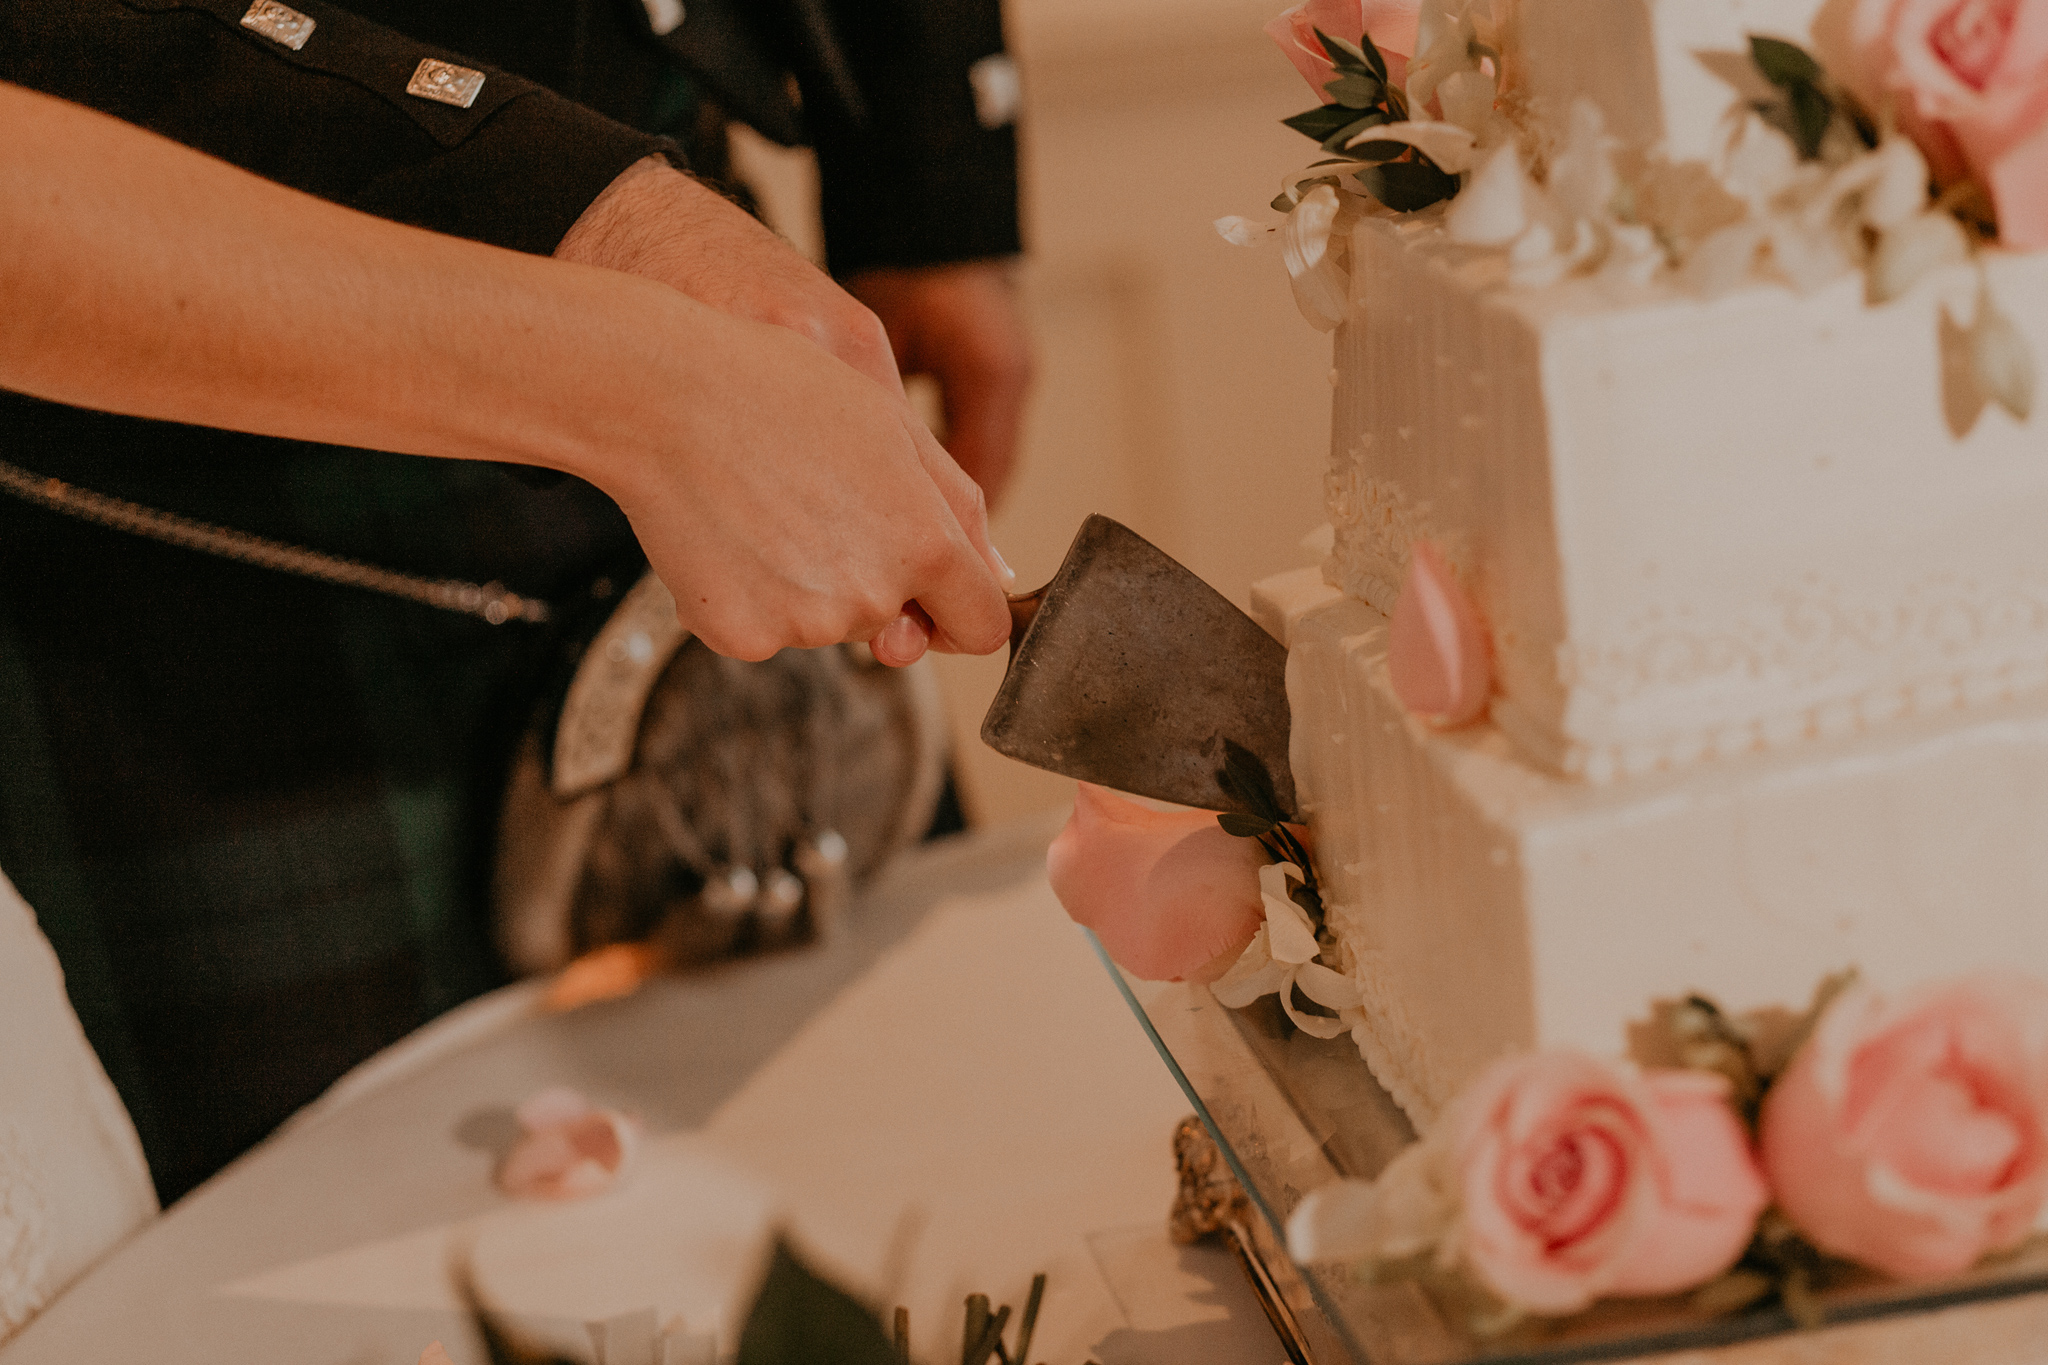 Close up photo of bride and groom cutting wedding cake